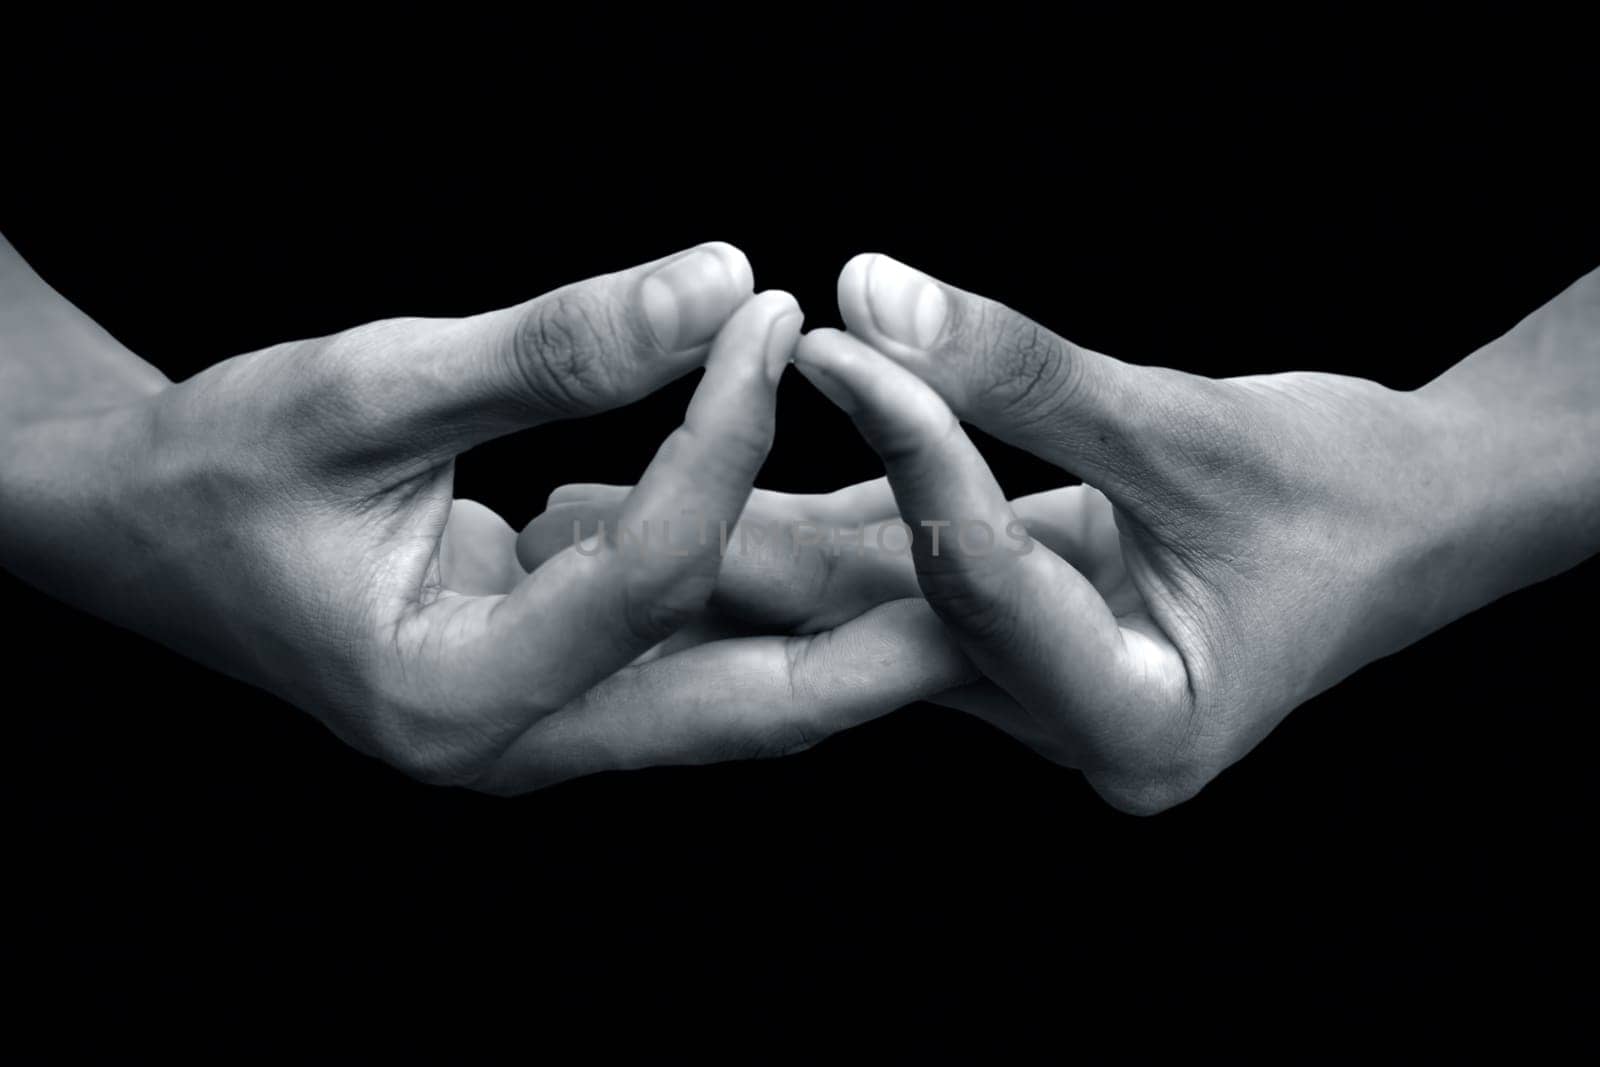 Mida-no Jouin Mudra demonstrated by male hands isolated on black background. by mirzamlk